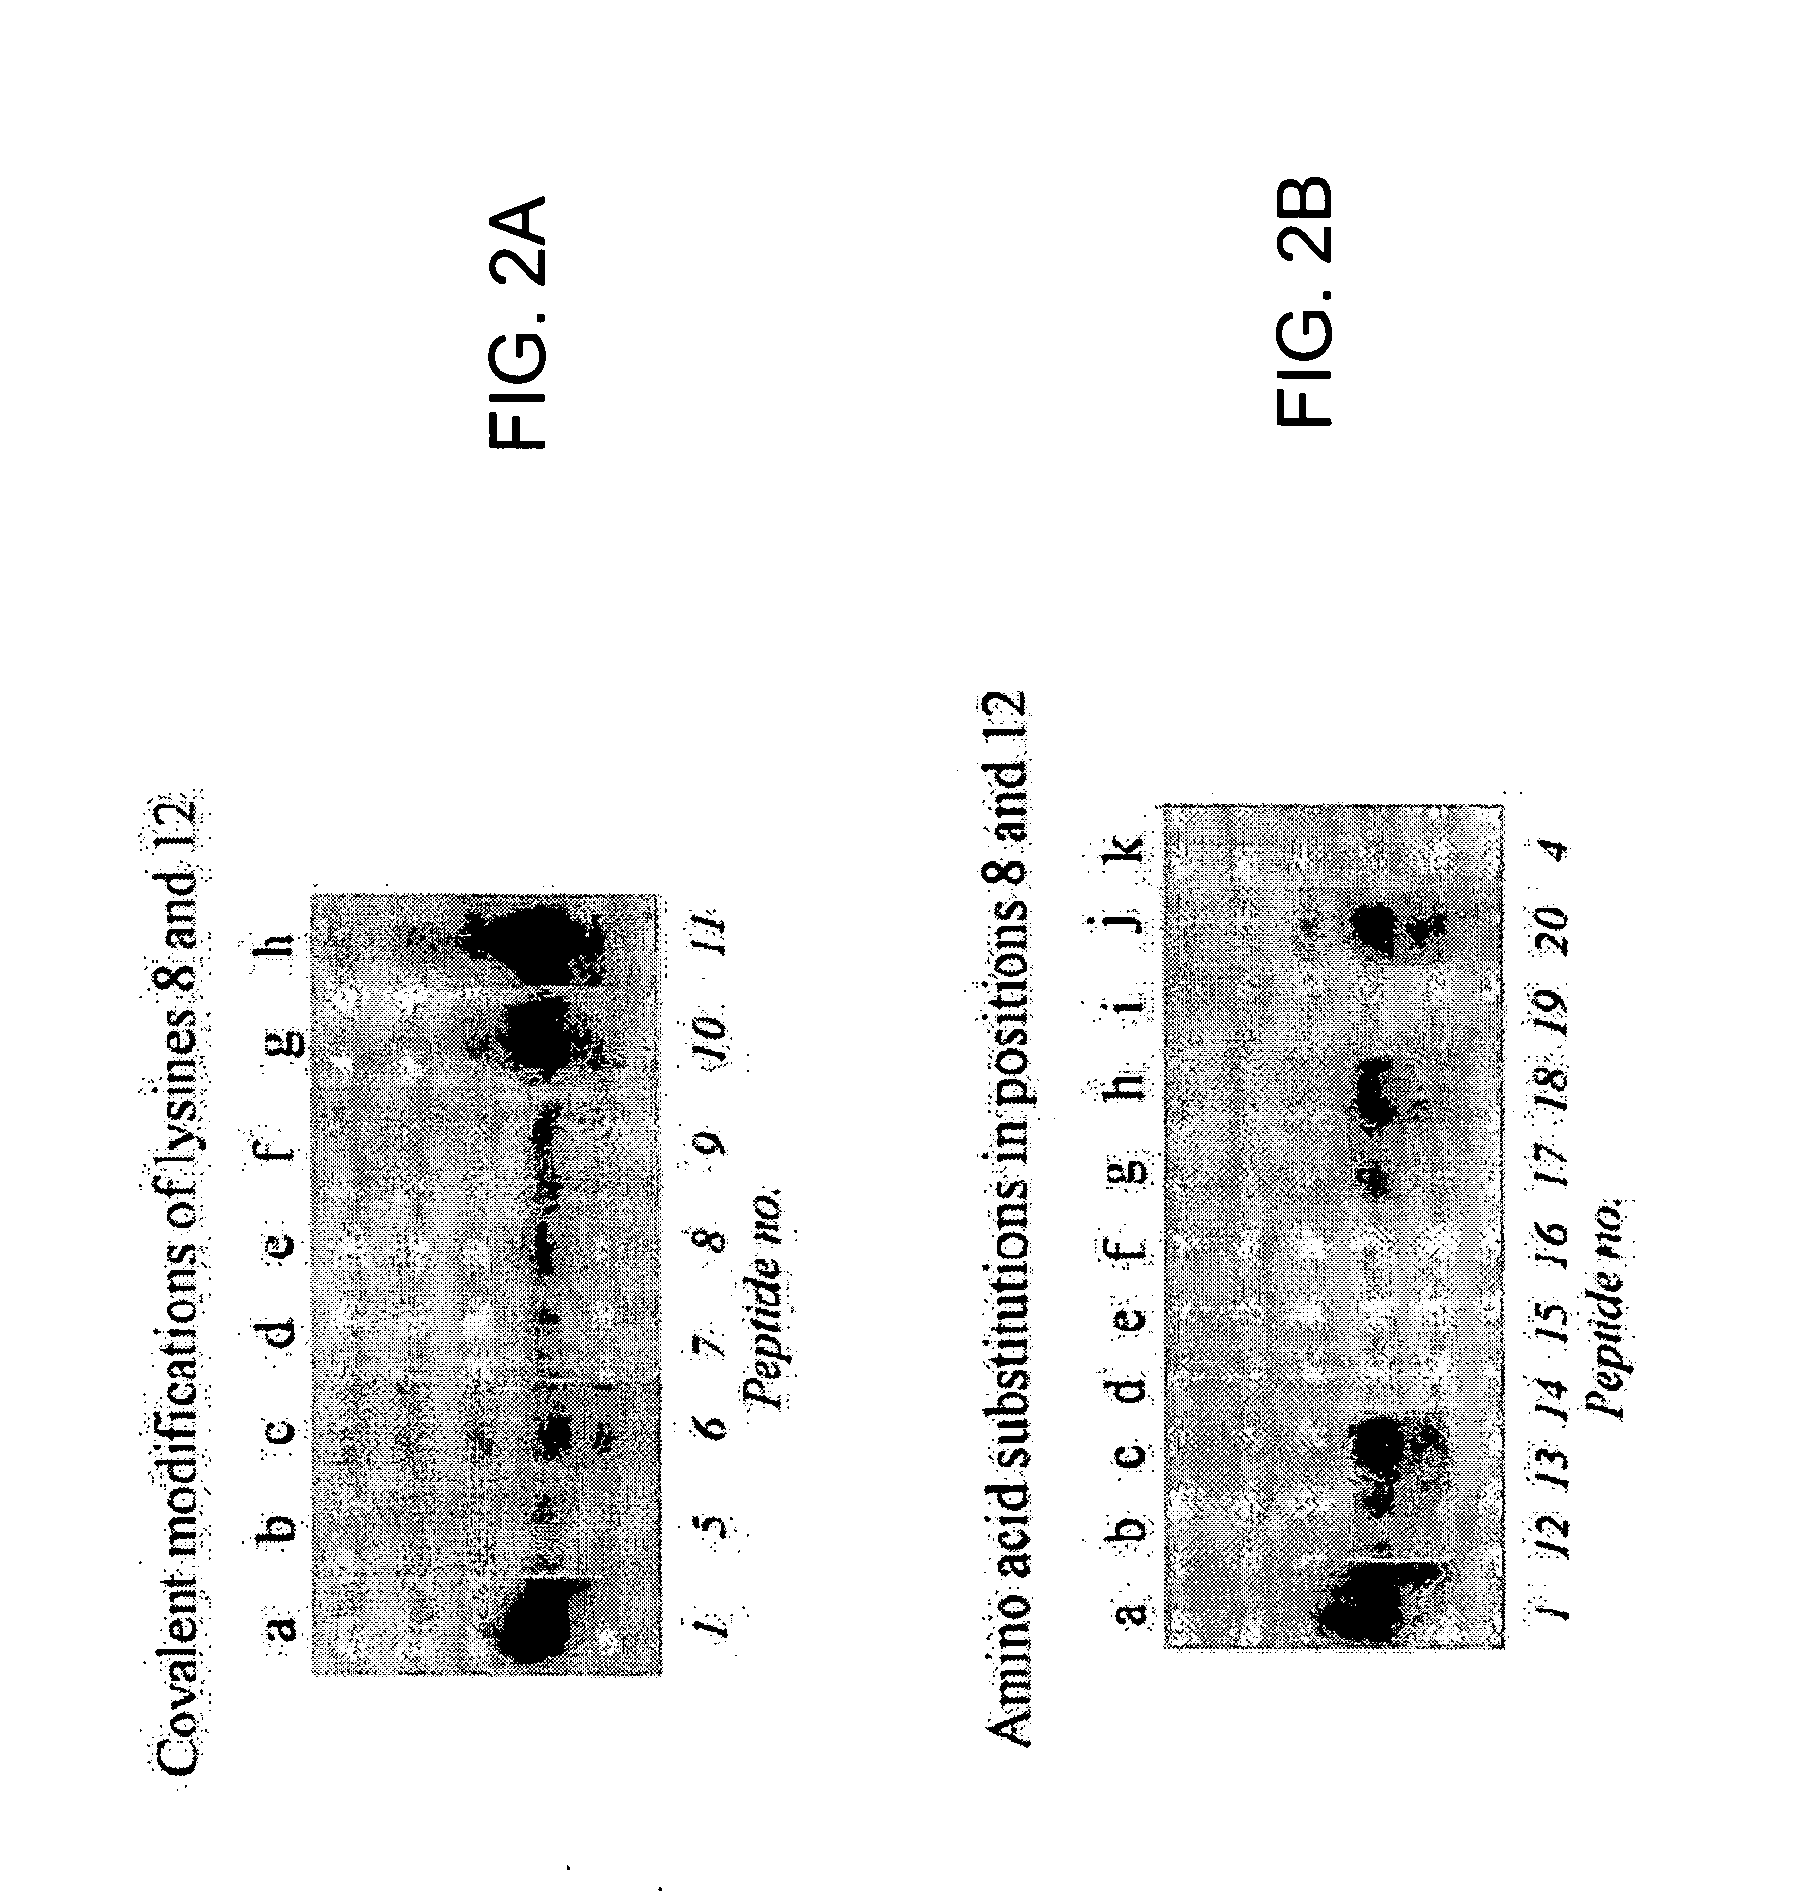 Antibodies against biotinylated histones and related proteins and assays related thereto